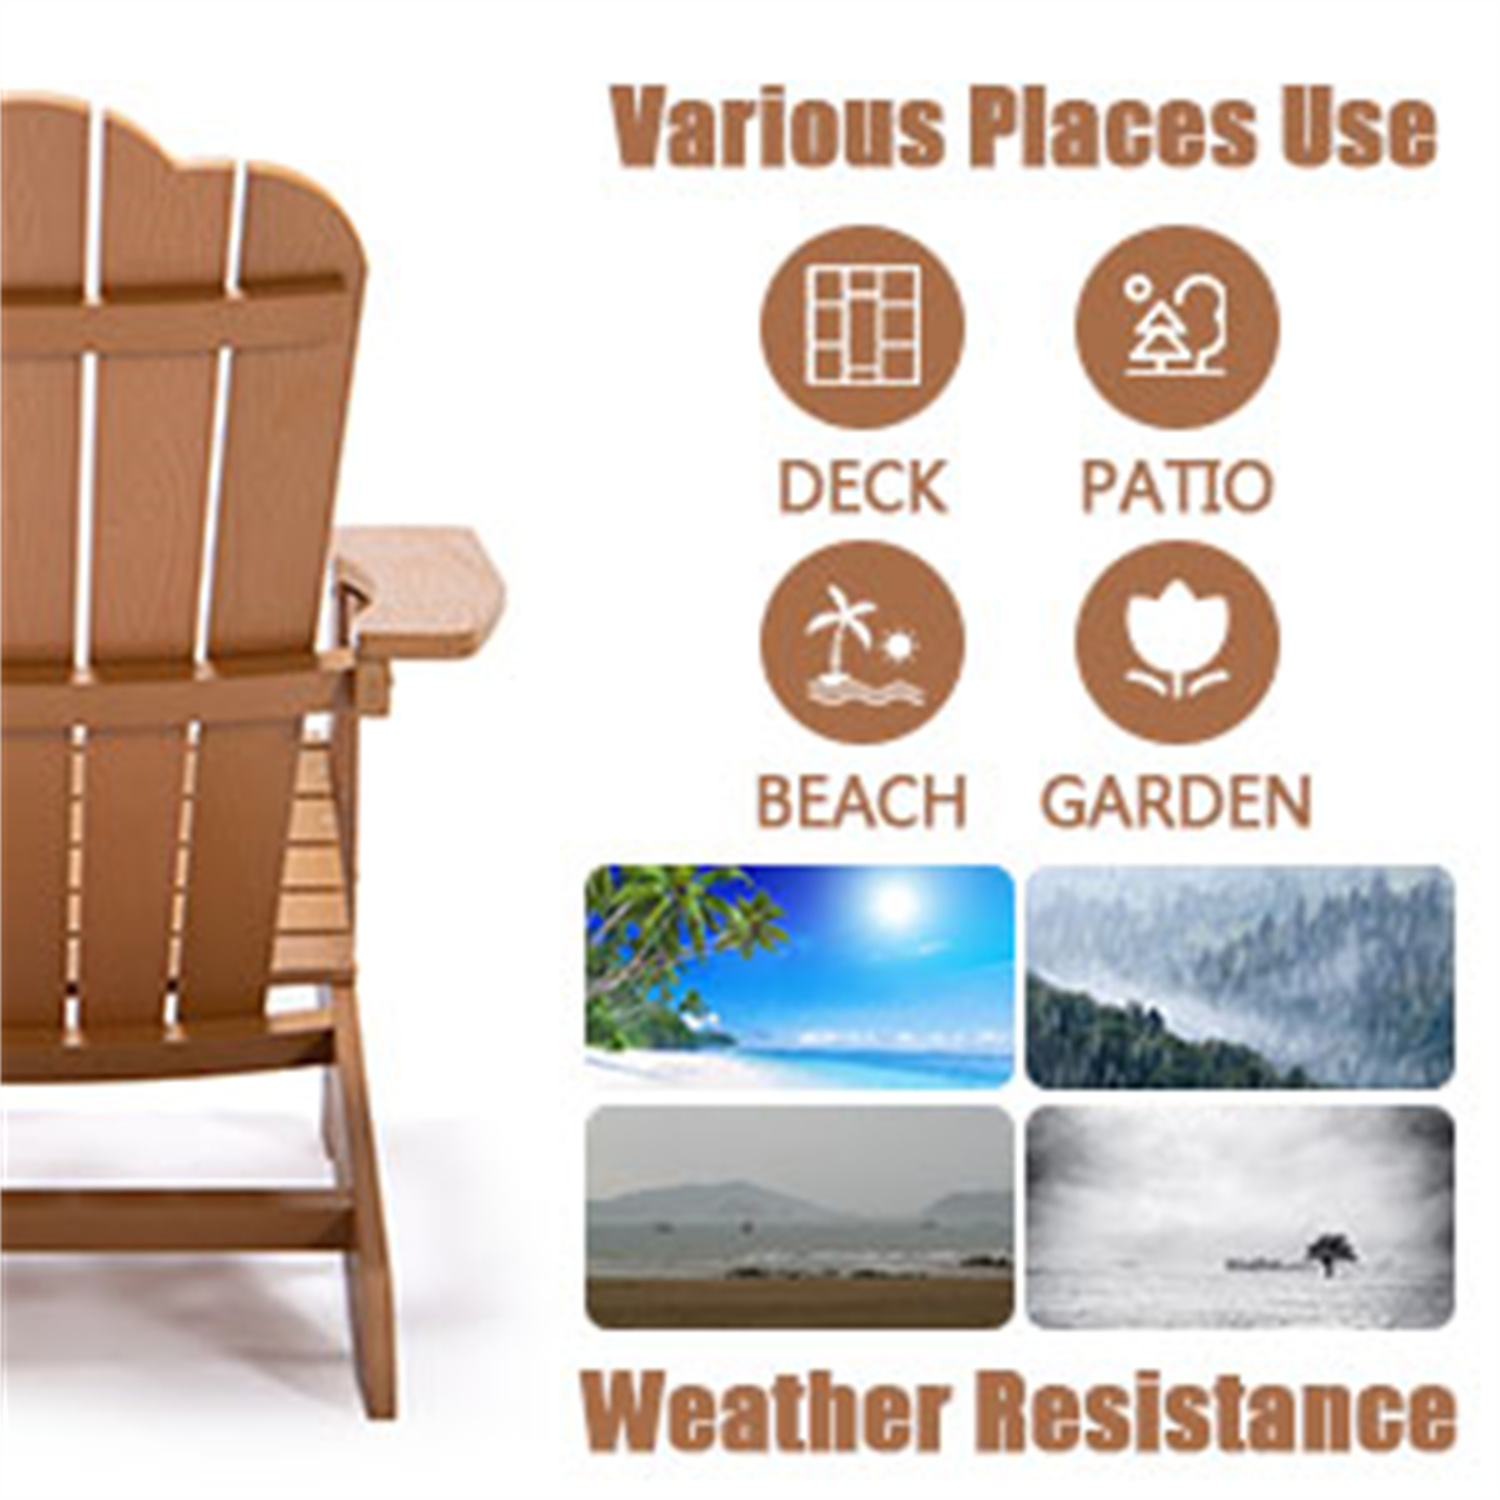 Oversized Folding Adirondack Chair with Cup Holder, Fade-Resistant Lounge Chair, 380lbs Capacity, All-Weather Chair for Lawn Outdoor Patio Deck Garden Porch Lawn, Brown - image 4 of 7